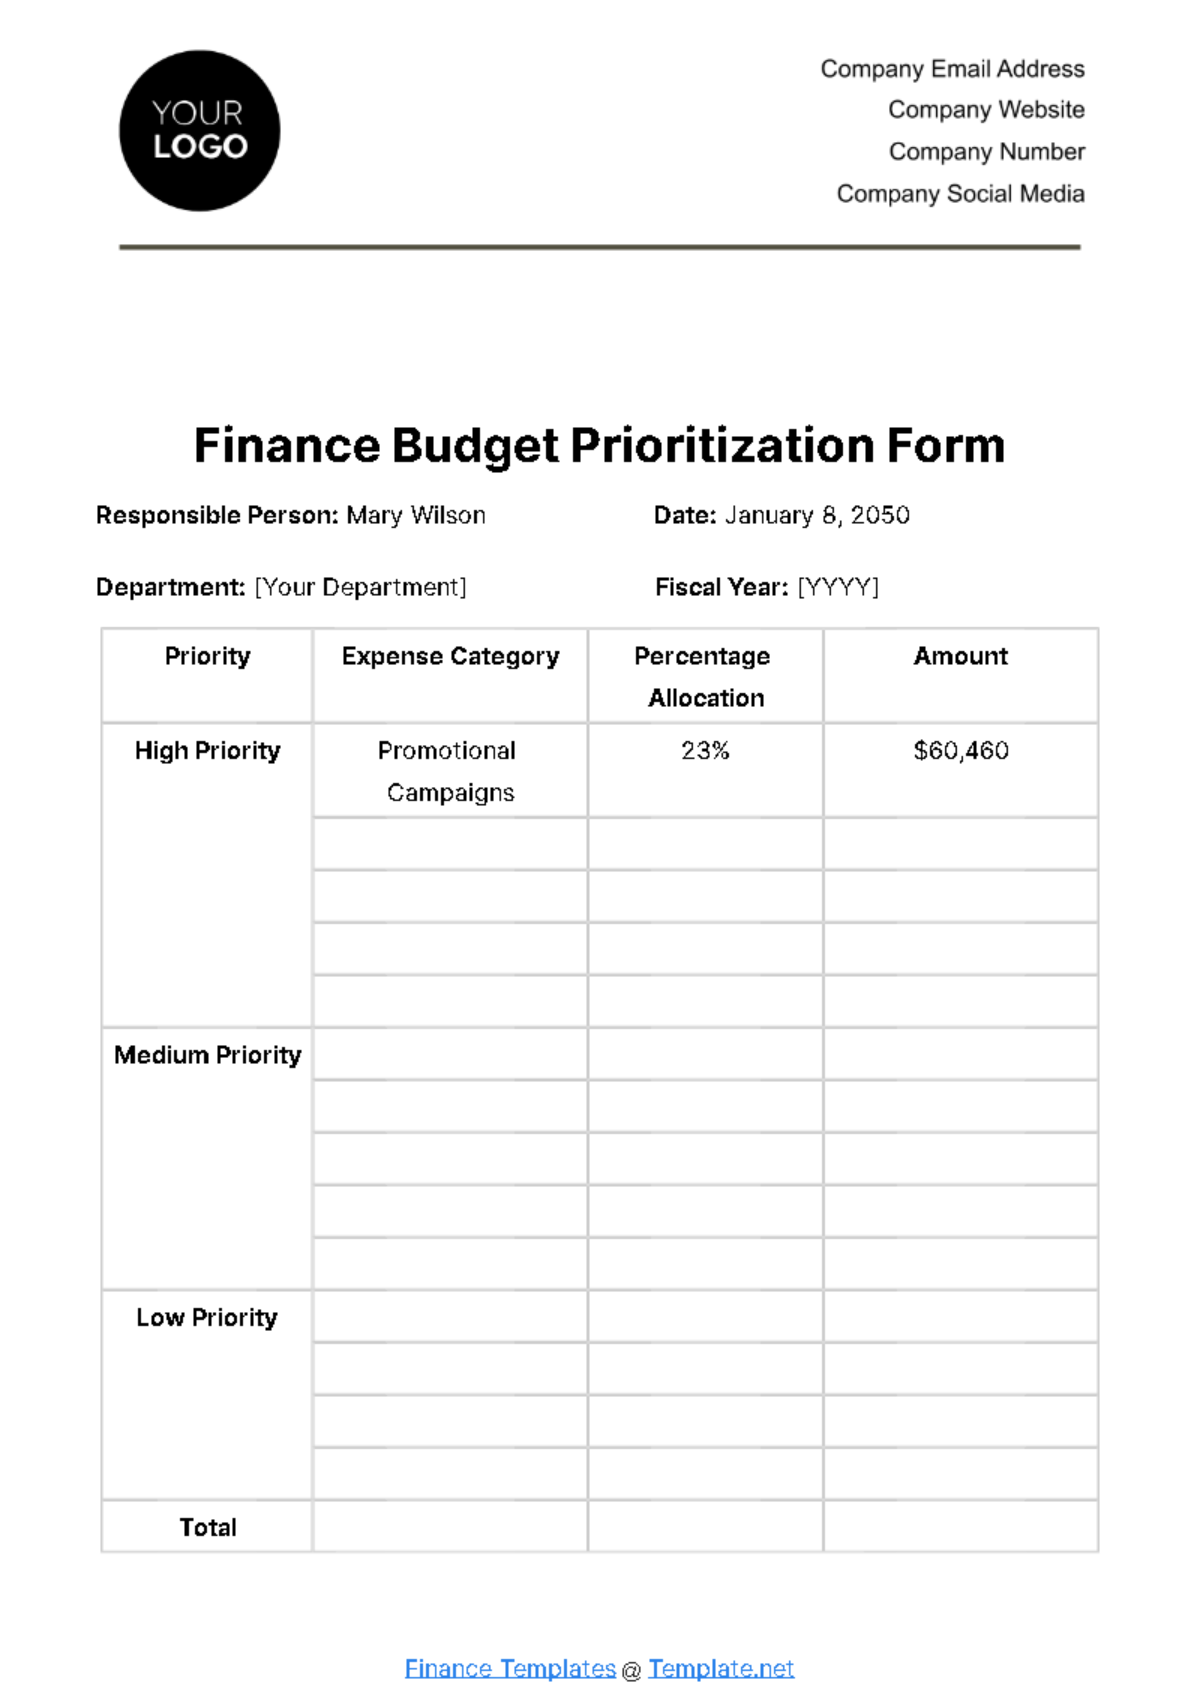 Free Finance Budget Prioritization Form Template